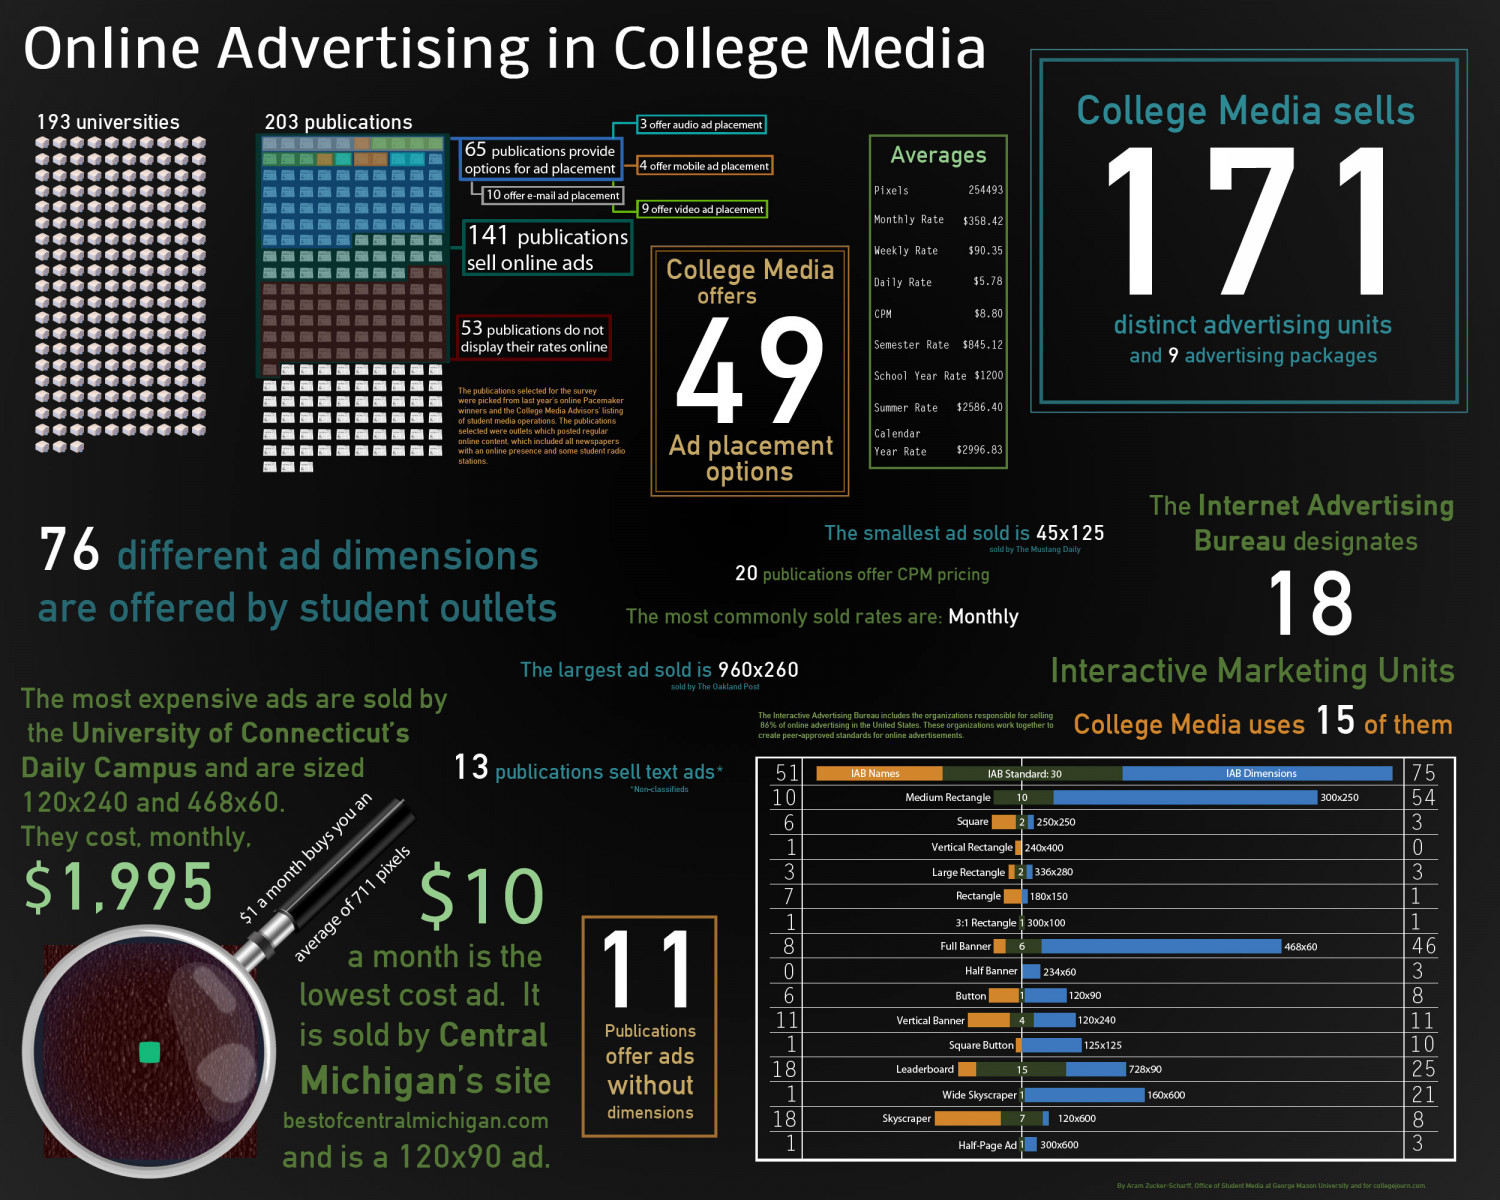 Online Advertising in College Media  Infographic